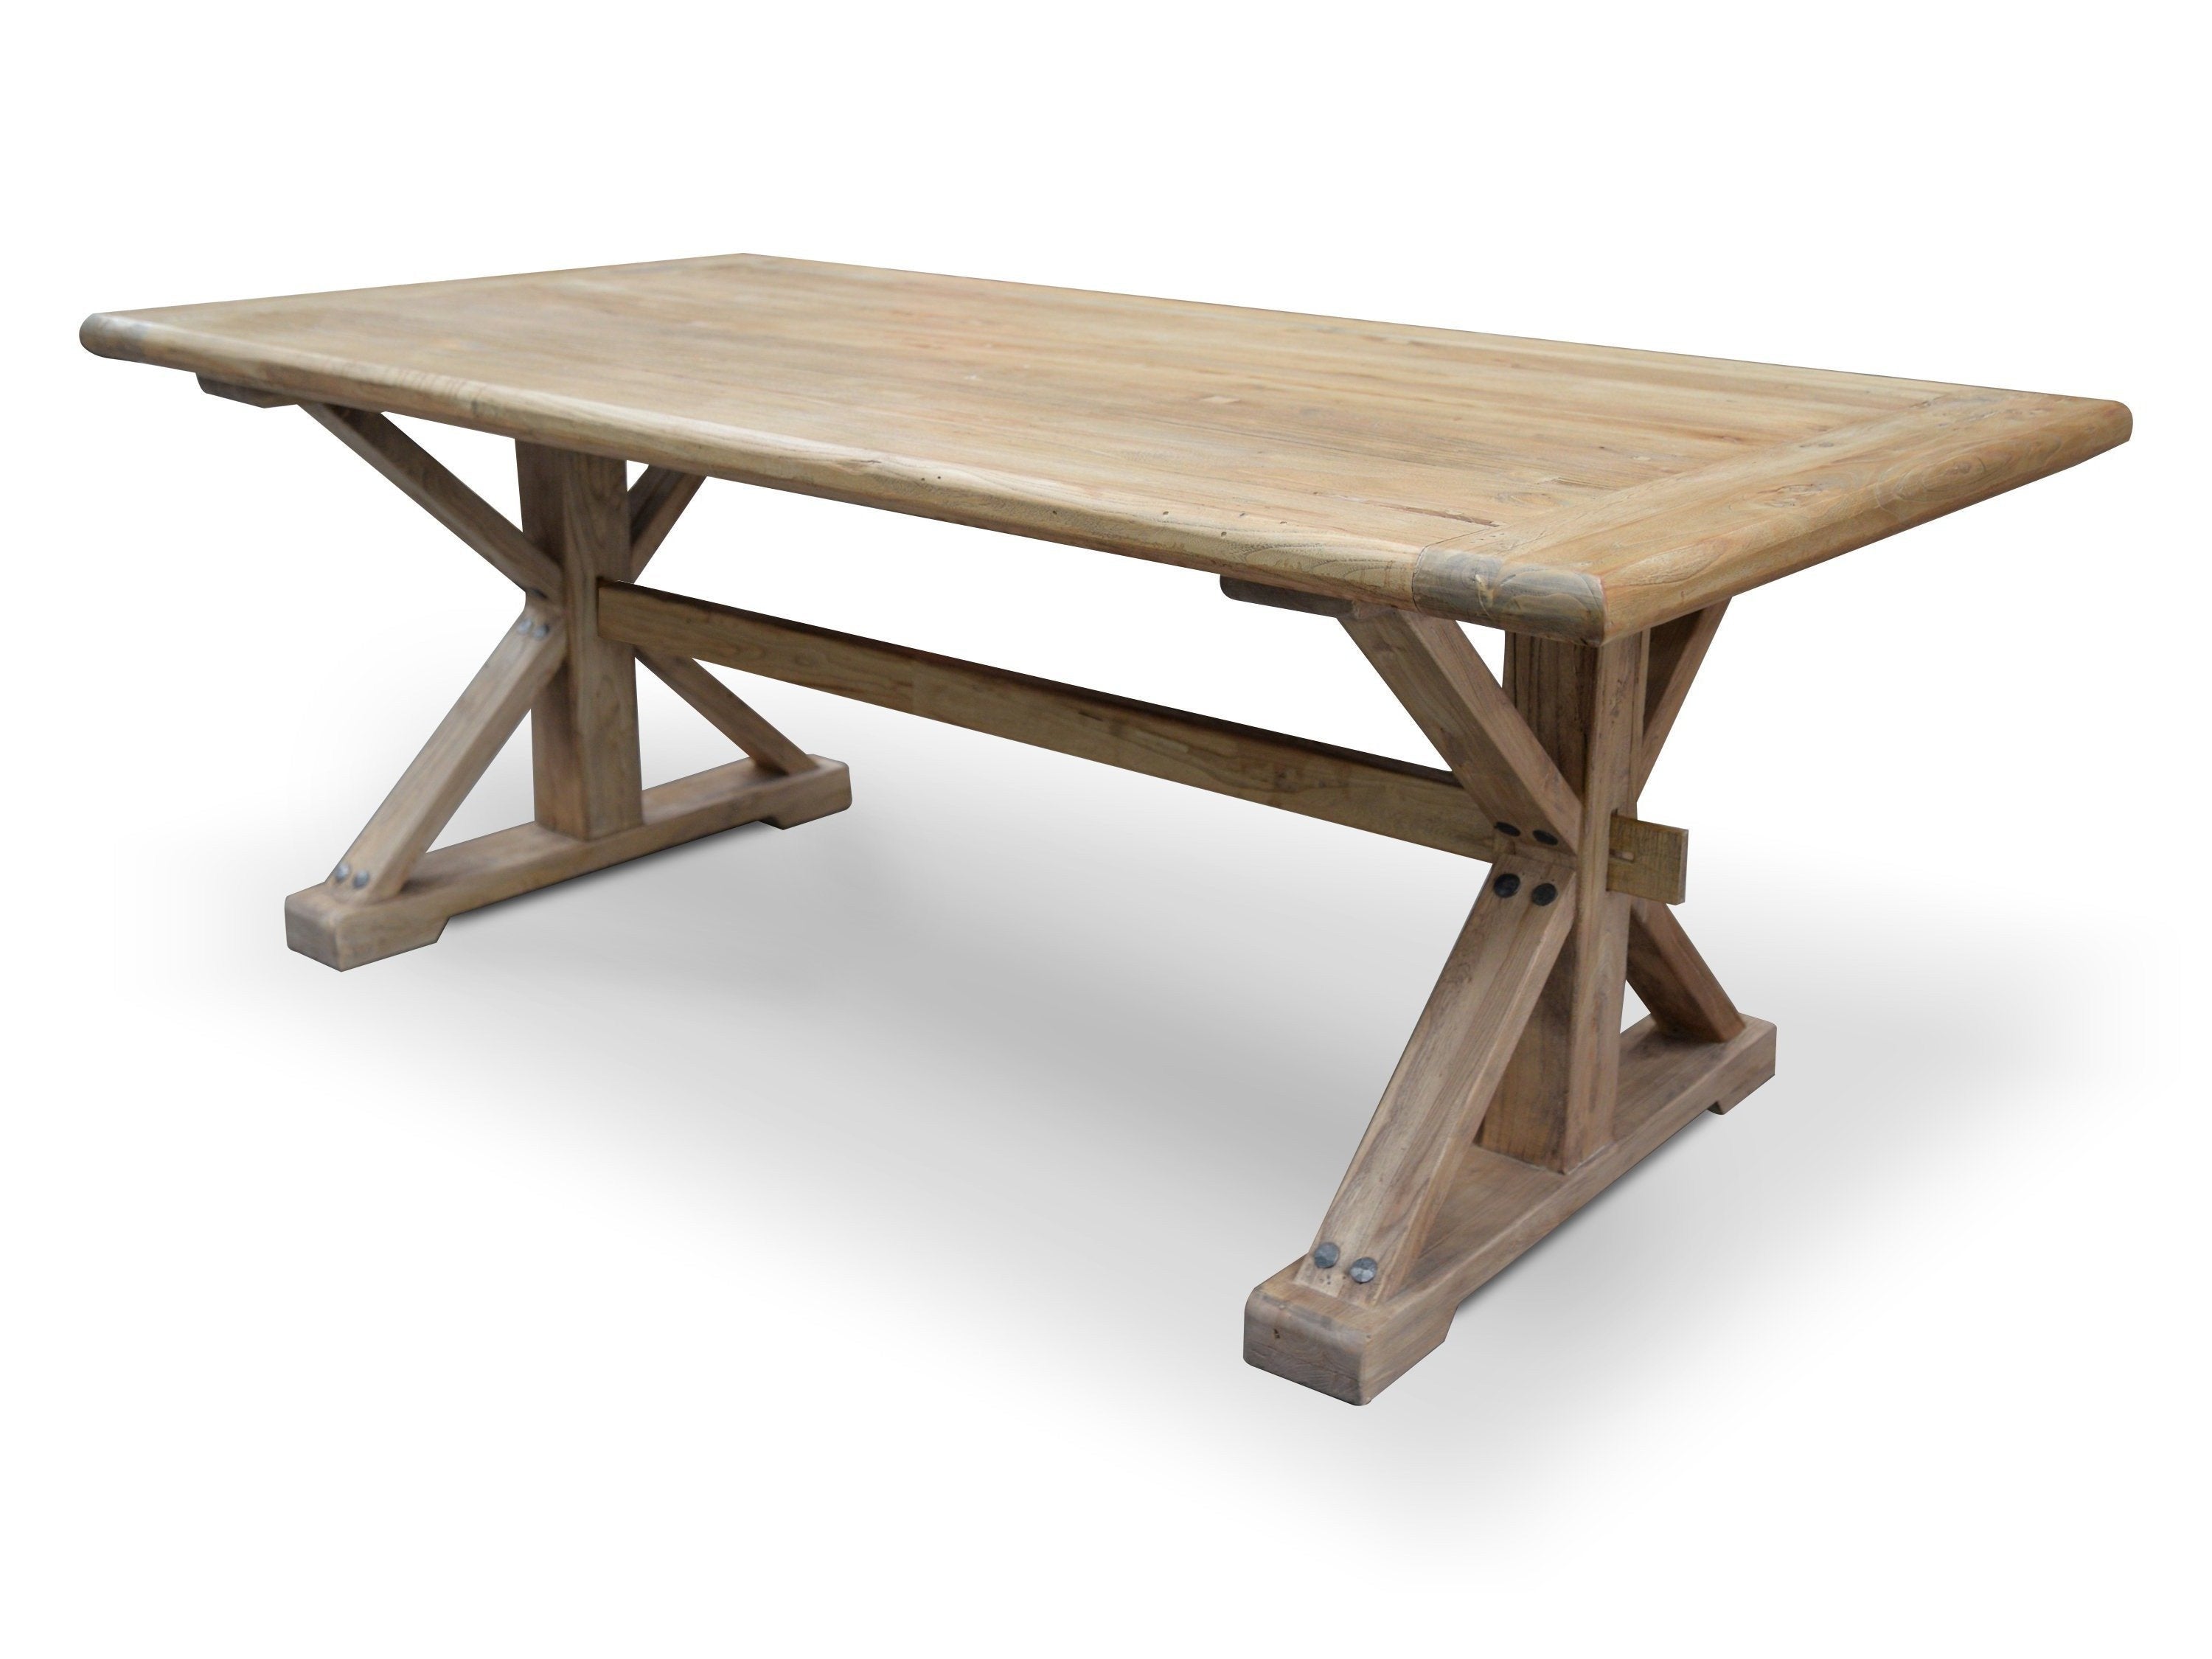 Winston 2m Reclaimed Elm Wood Dining Table - Rustic Natural